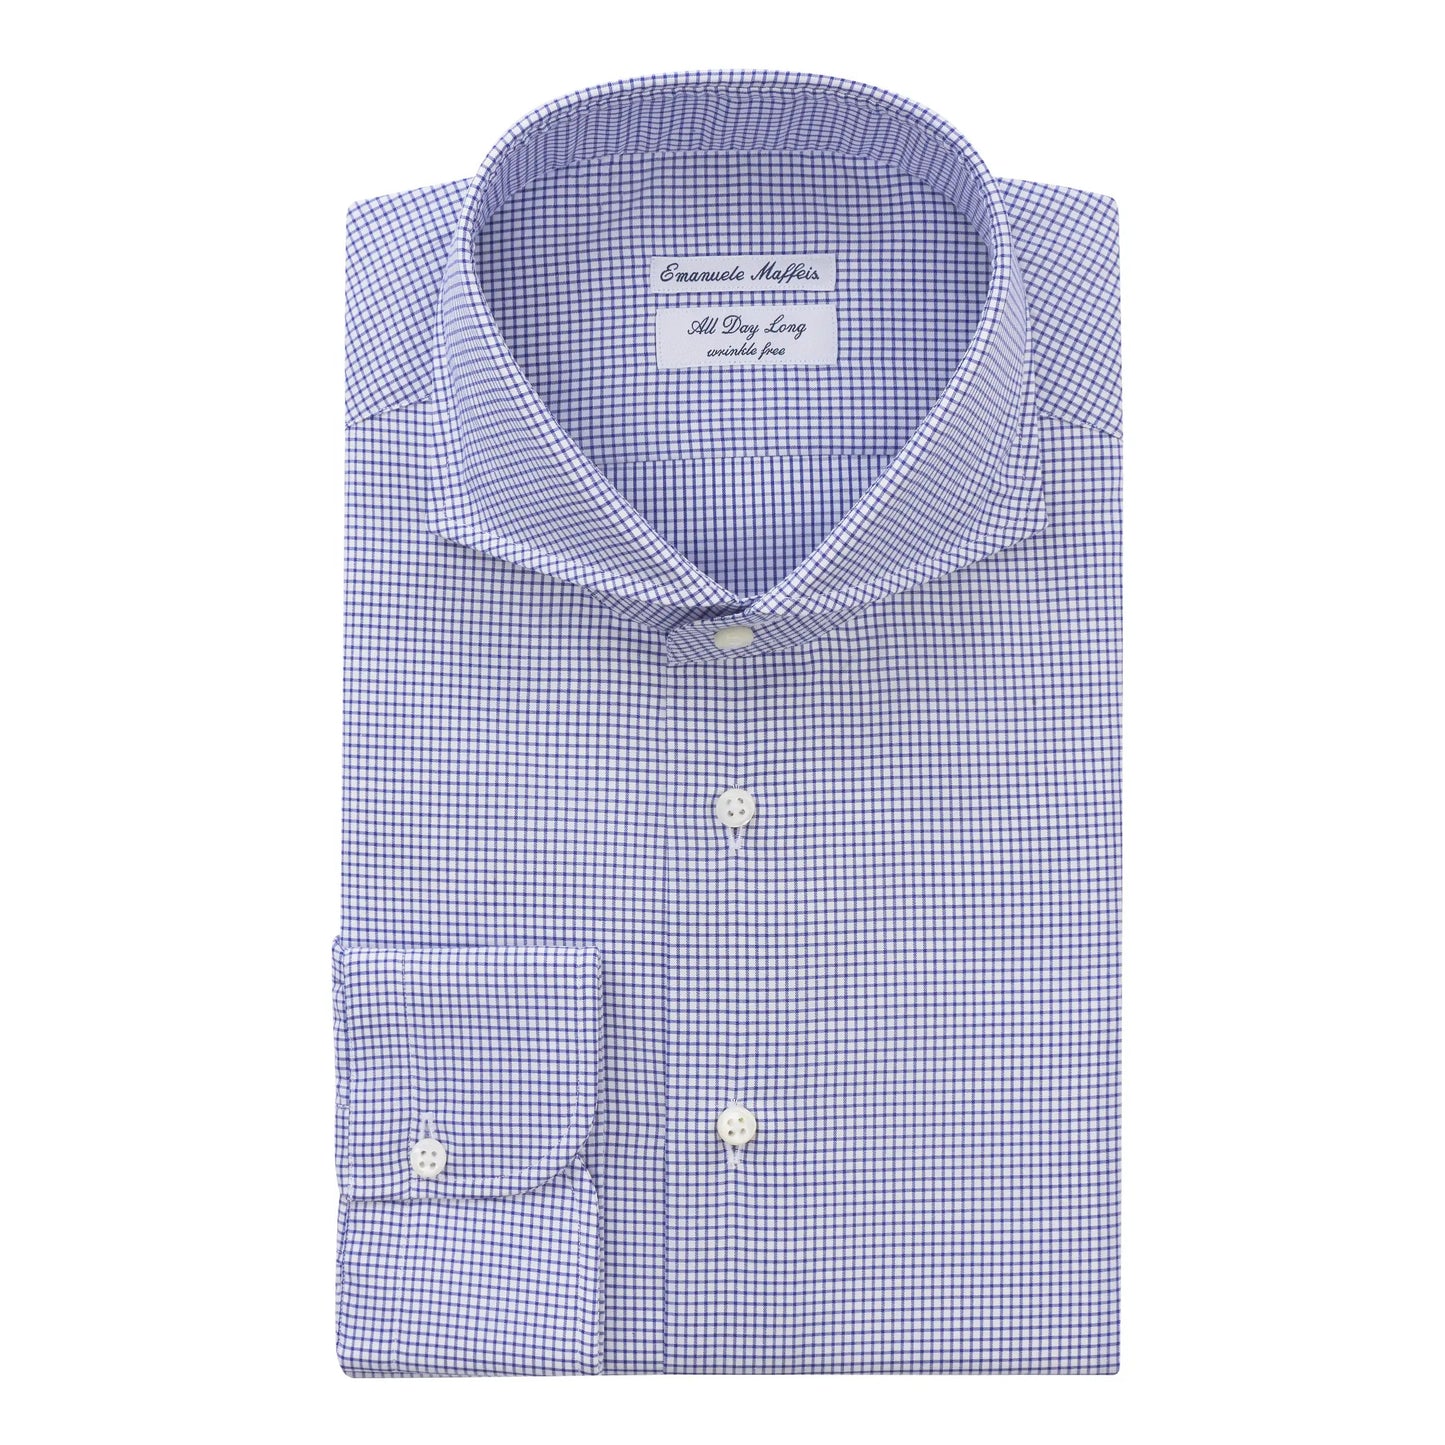 Emanuele Maffeis "All Day Long Collection" Checked Cotton Blue Shirt with Shark Collar - SARTALE